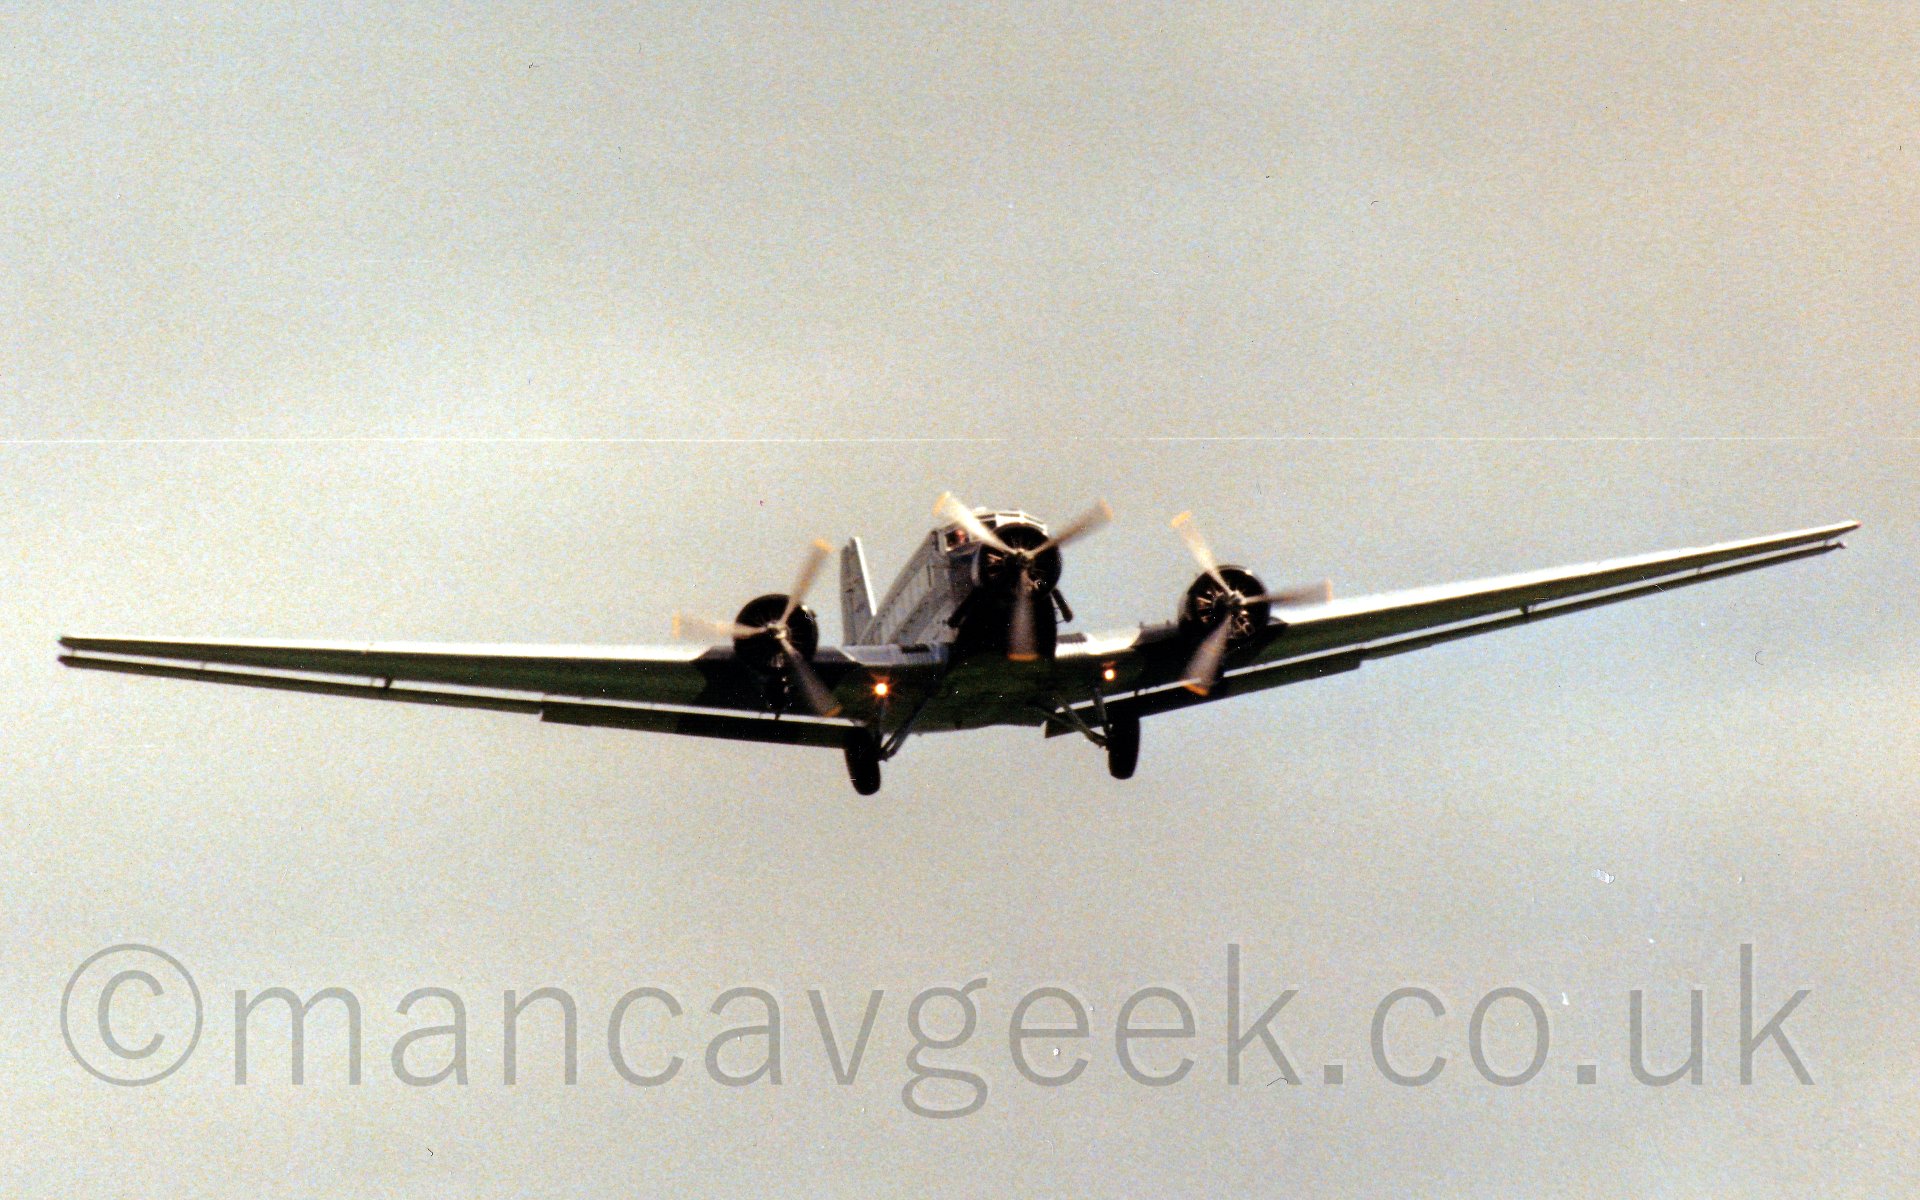 Low front view of a three propellor-engined airliner flying at low level slightly off to the right of the camera.the plane has an engine on each wing and one on the nose, with fixed undercarriage, and with flaps visibly running the full length of the wings. The gun-metal grey plane somehow stands out aginst the grey sky behind it.